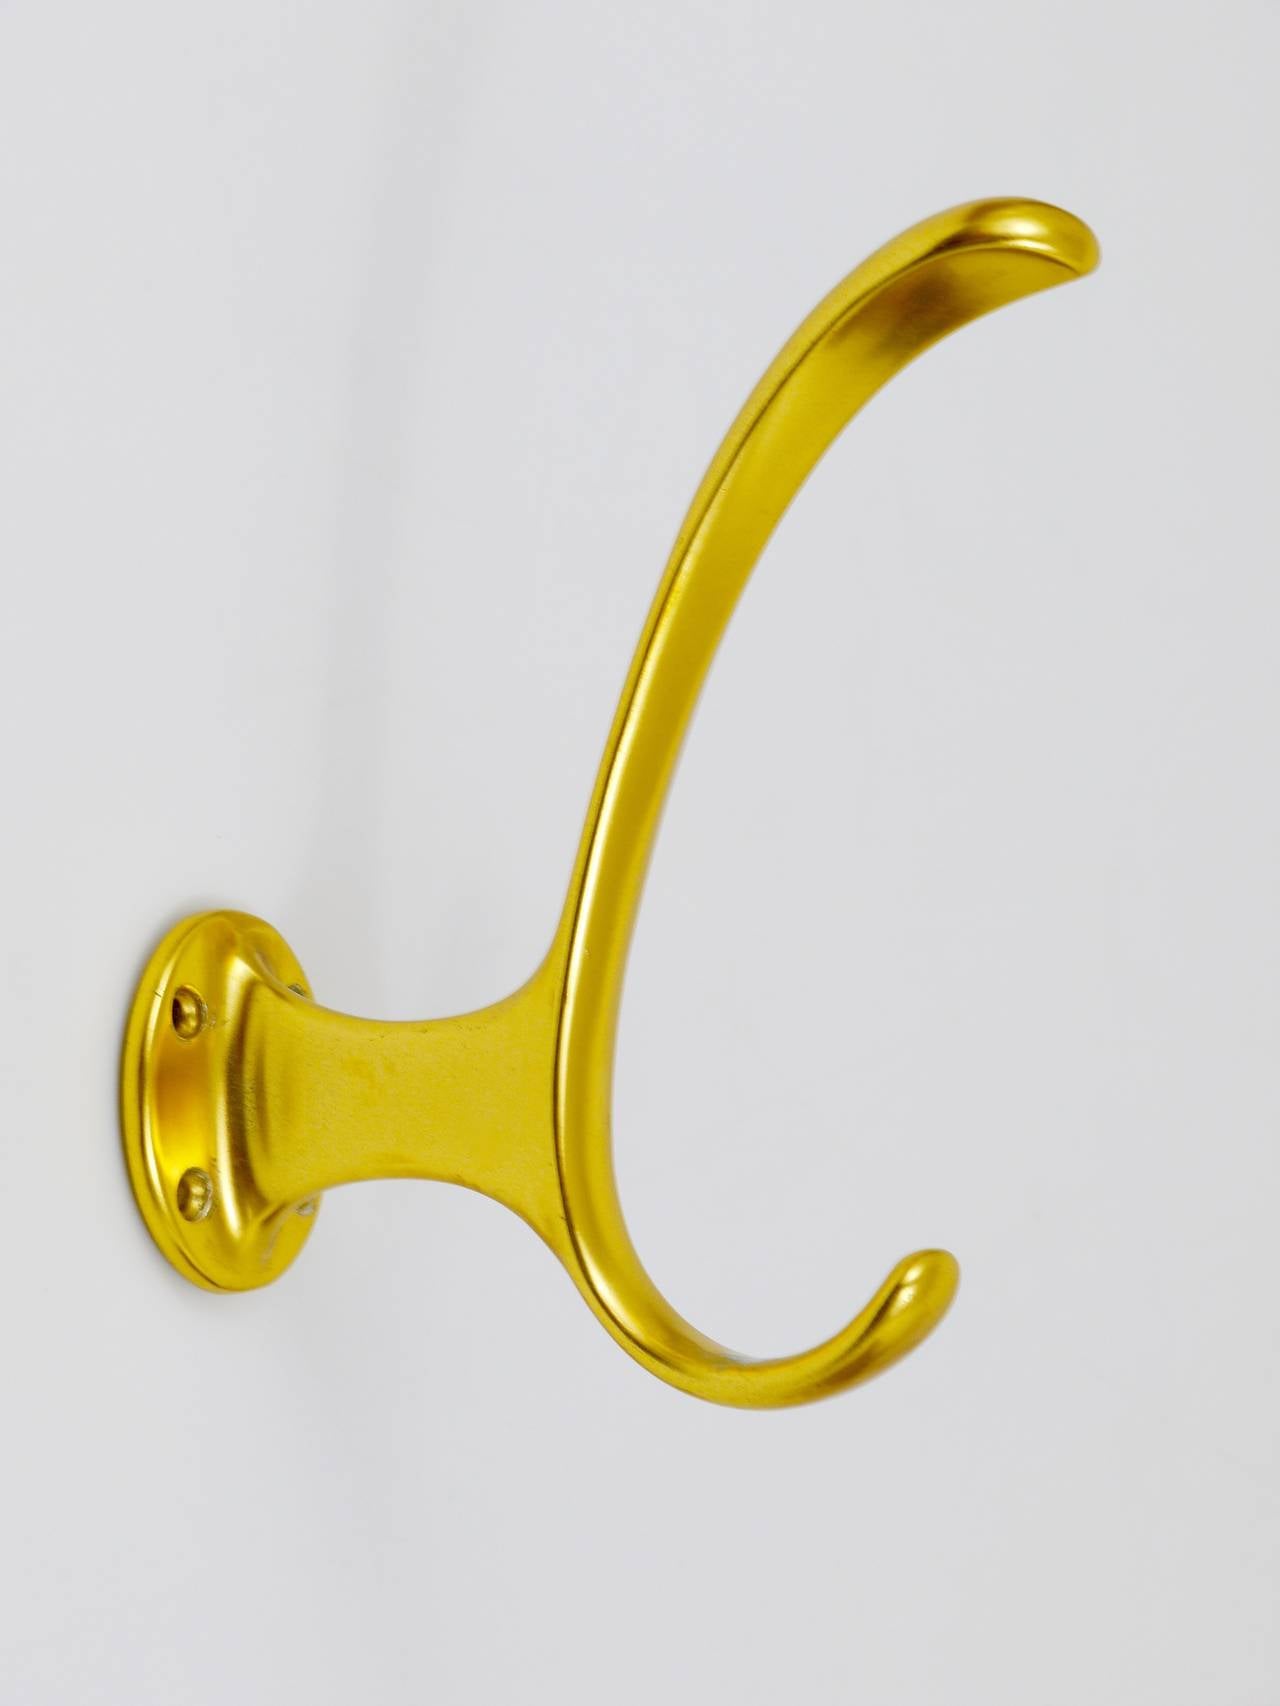 A set of 4 beautiful modernist wall hooks, executed in the 1950s in Austria. Made of gold-finished aluminium, in very good condition, with marginal patina.